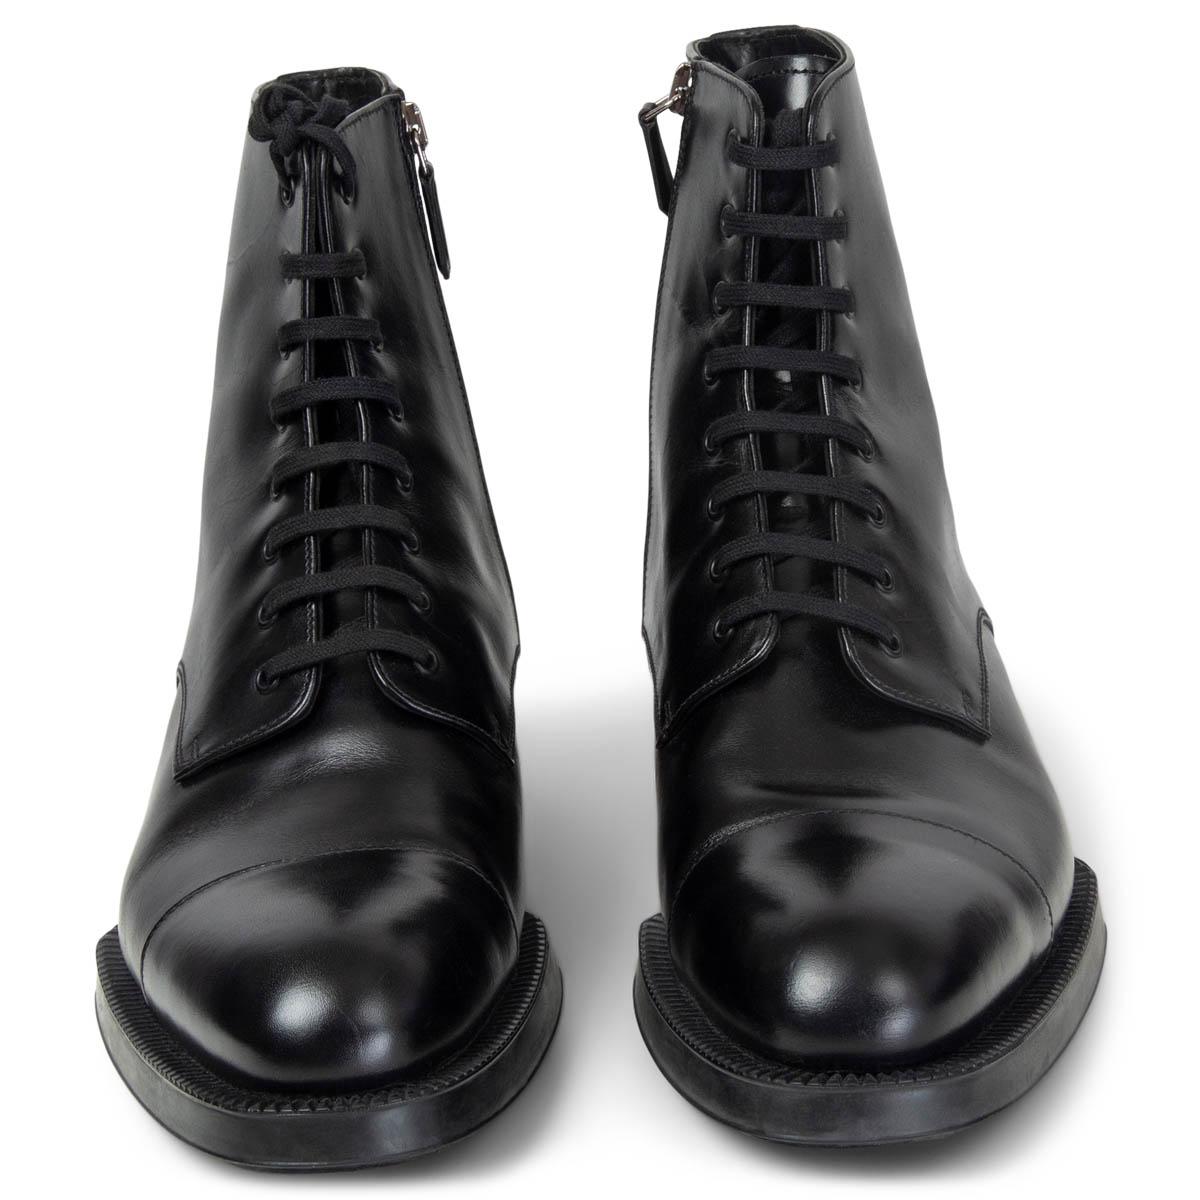 100% authentic Prada lace-up ankle boots in black smooth leather and rubber sole. Open with a zipper on the inside. Have been worn and are in  excellent condition. Come with dust bag. 

Measurements
Imprinted Size	40
Shoe Size	40
Inside Sole	27cm